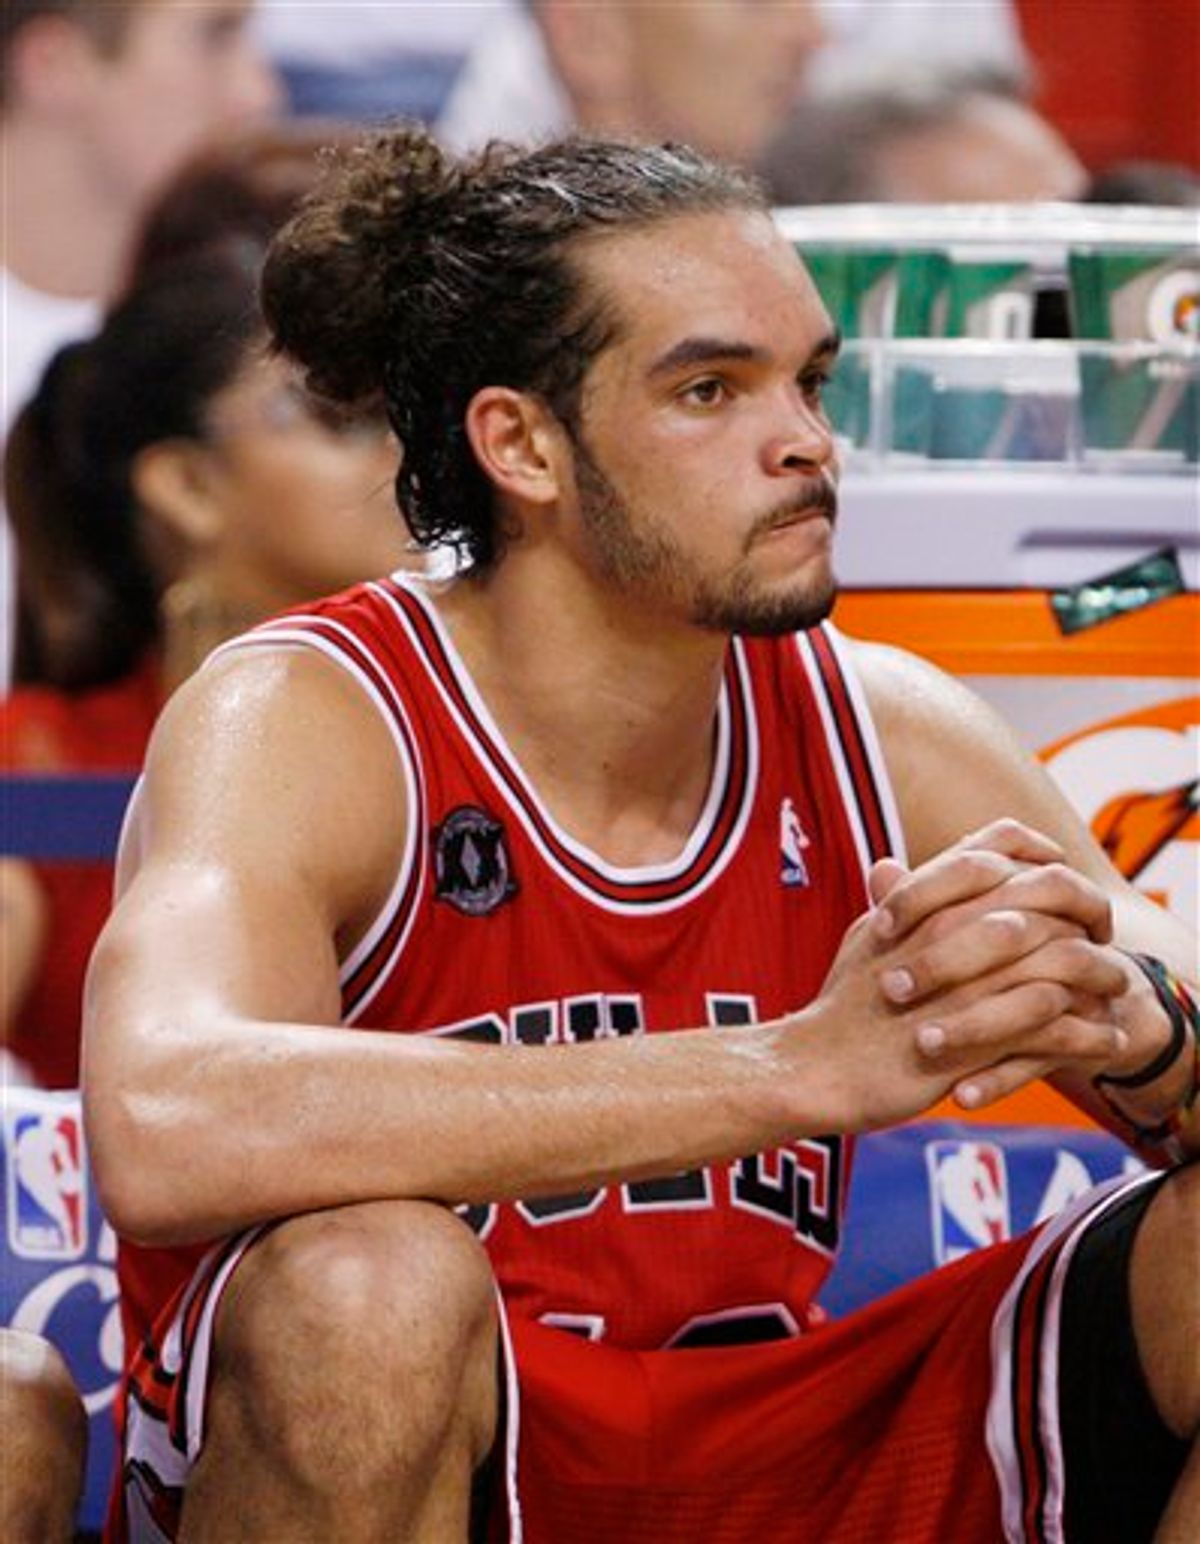 This photo take May 22, 2011 shows Chicago Bulls' Joakim Noah during Game 3 of the NBA Eastern Conference finals basketball series against the Miami Heat in Miami, Sunday, May 22, 2011. Noah apologized again Monday May 23, 2011,  for directing an anti-gay slur at a fan during Game 3 of the Eastern Conference finals, and was bracing for punishment  likely a large fine  from the NBA. (AP Photo/Wilfredo Lee)    (AP)